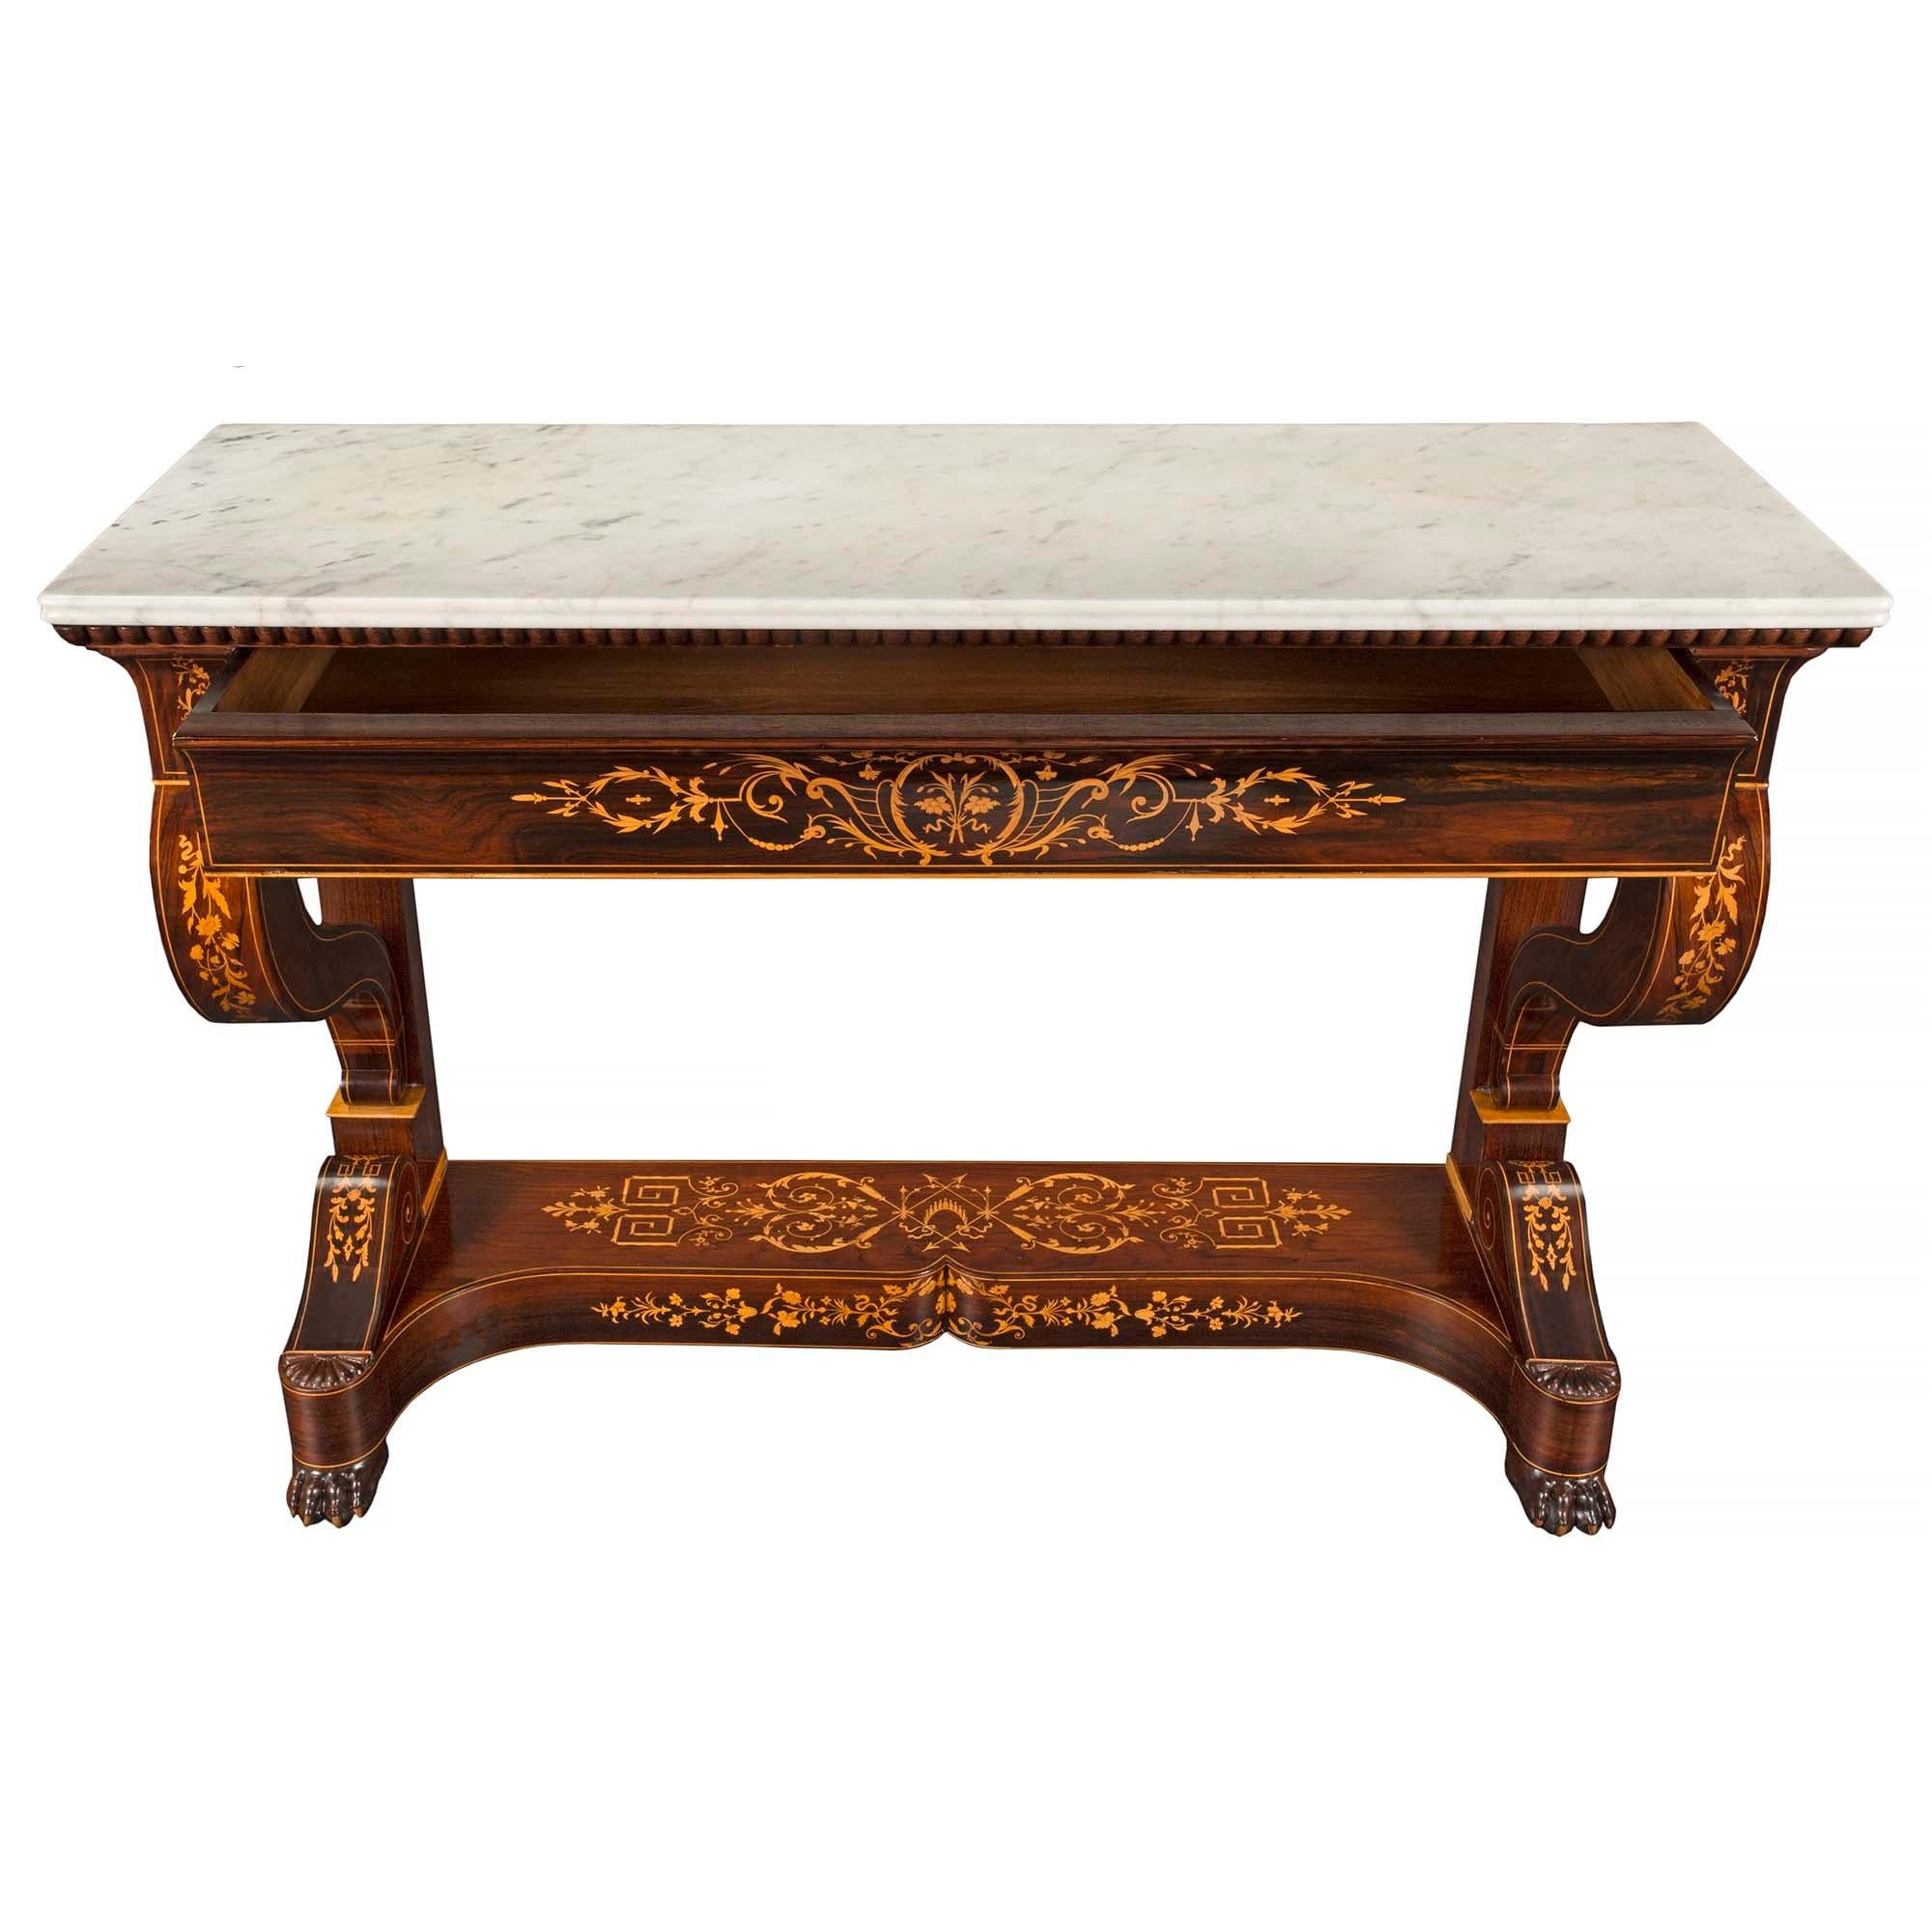 An outstanding French 19th century Charles X period rosewood, maple and marble console with one drawer. The console is raised by handsome carved paw feet below a most decorative concave, arbalest shaped bottom tier with beautiful masterfully inlaid